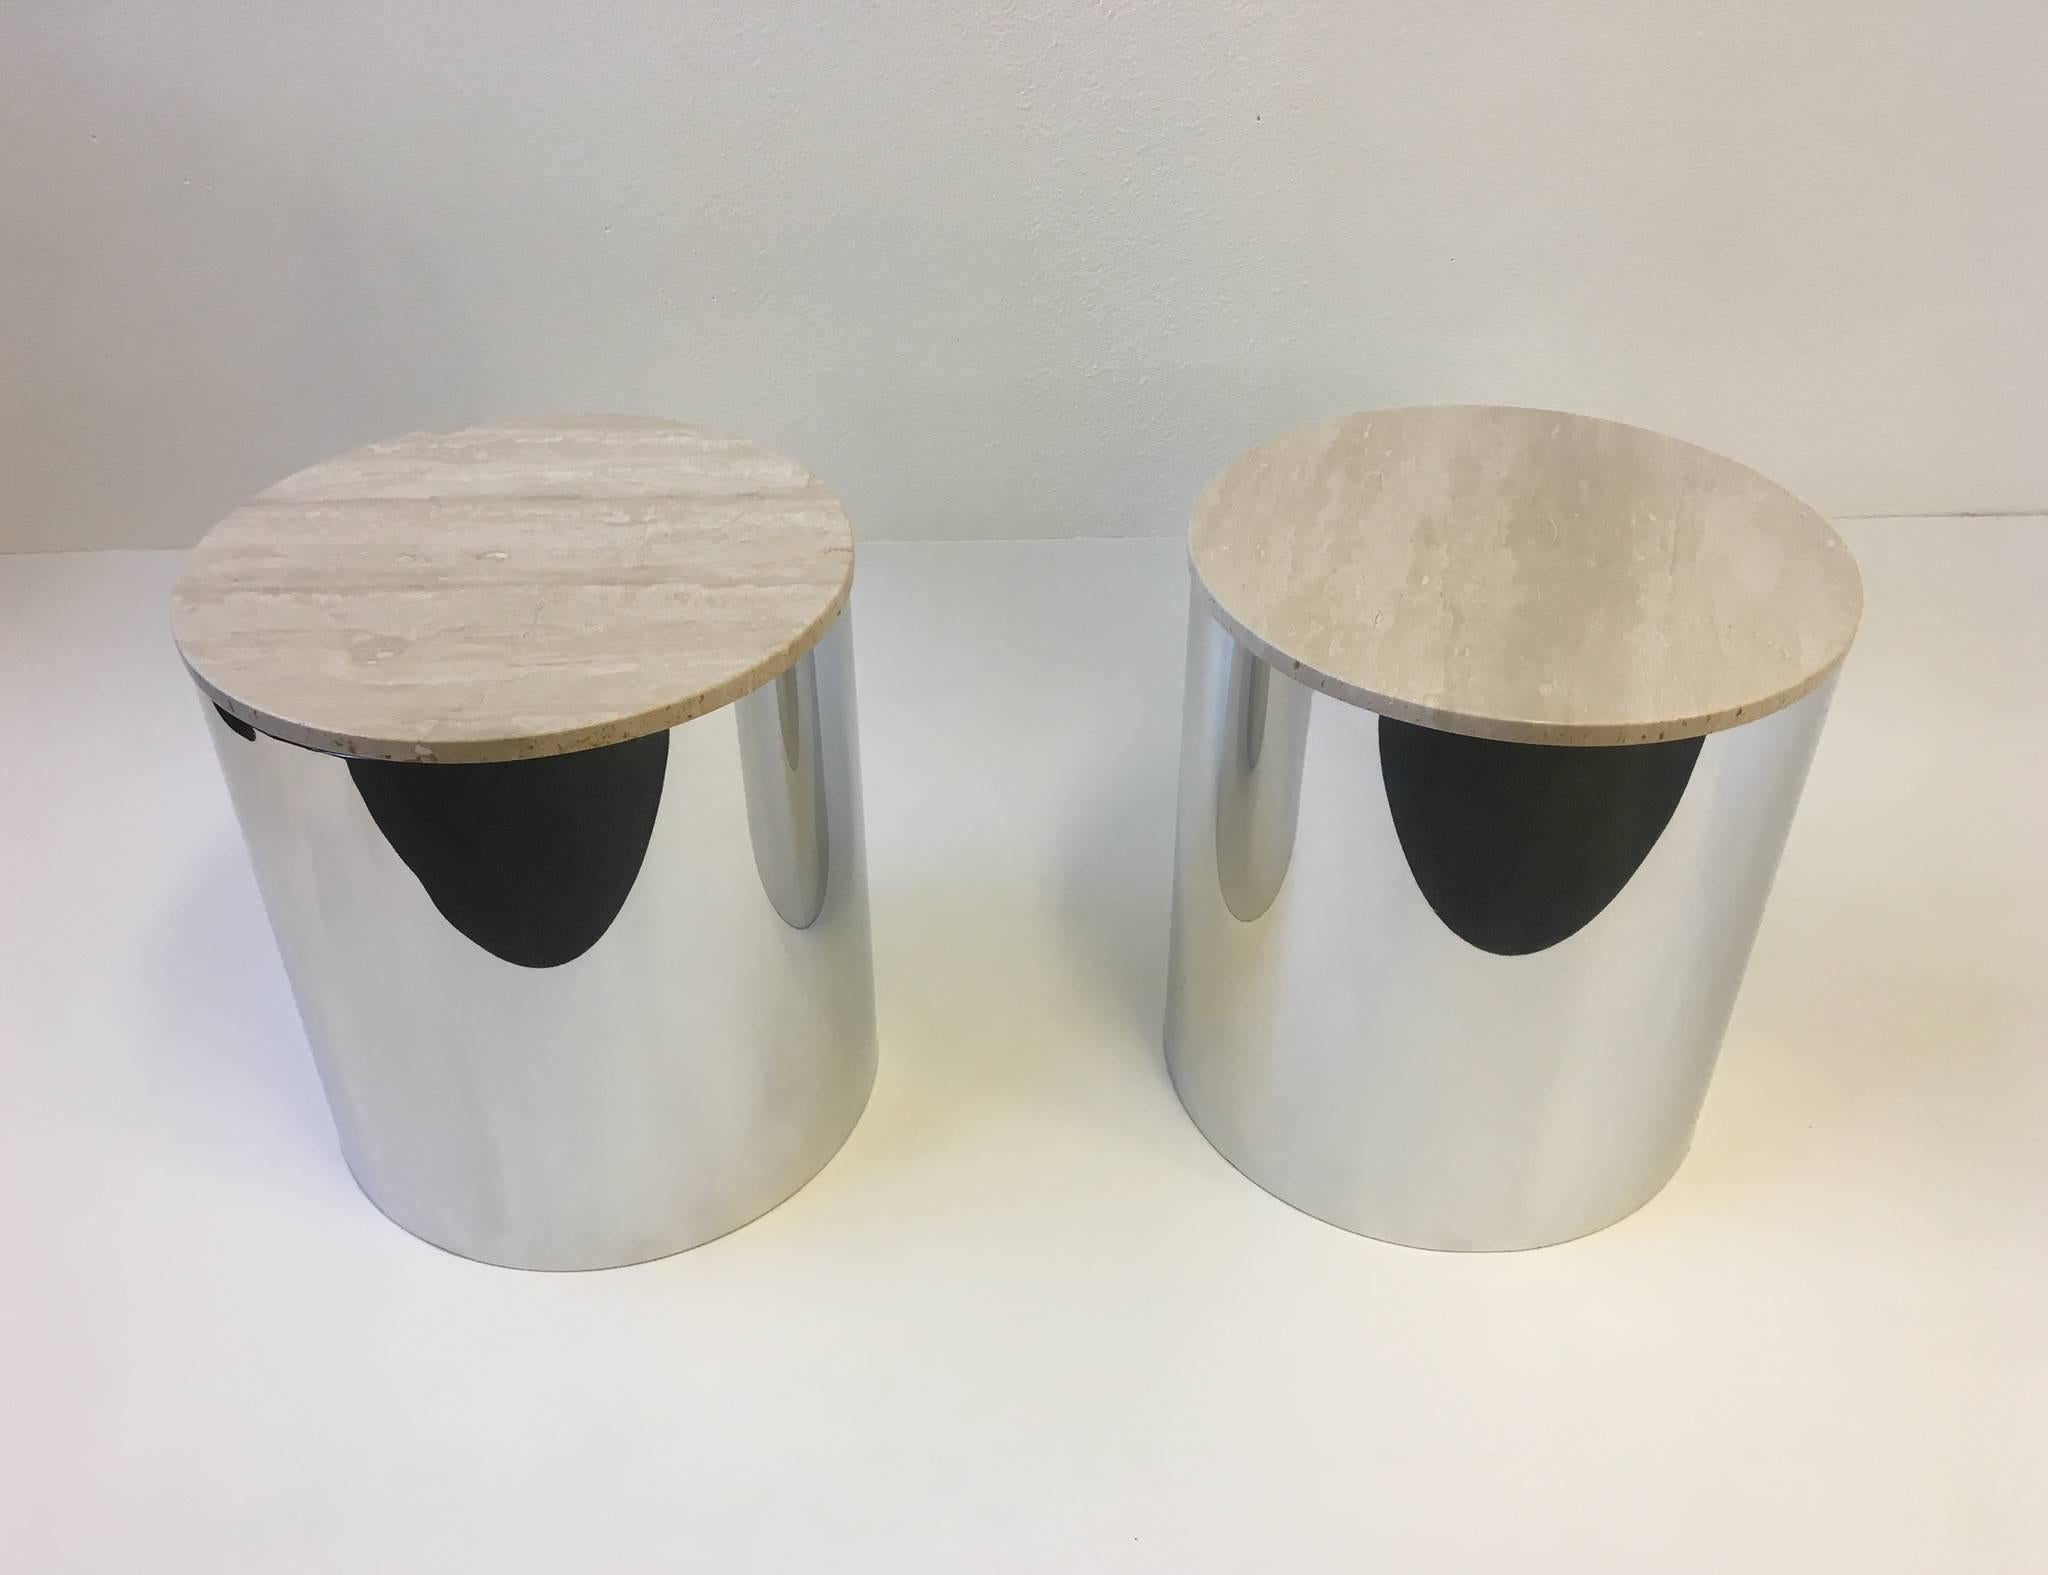 Pair of Italian Travertine and Polished Aluminum Drum Tables by Paul Mayen 1